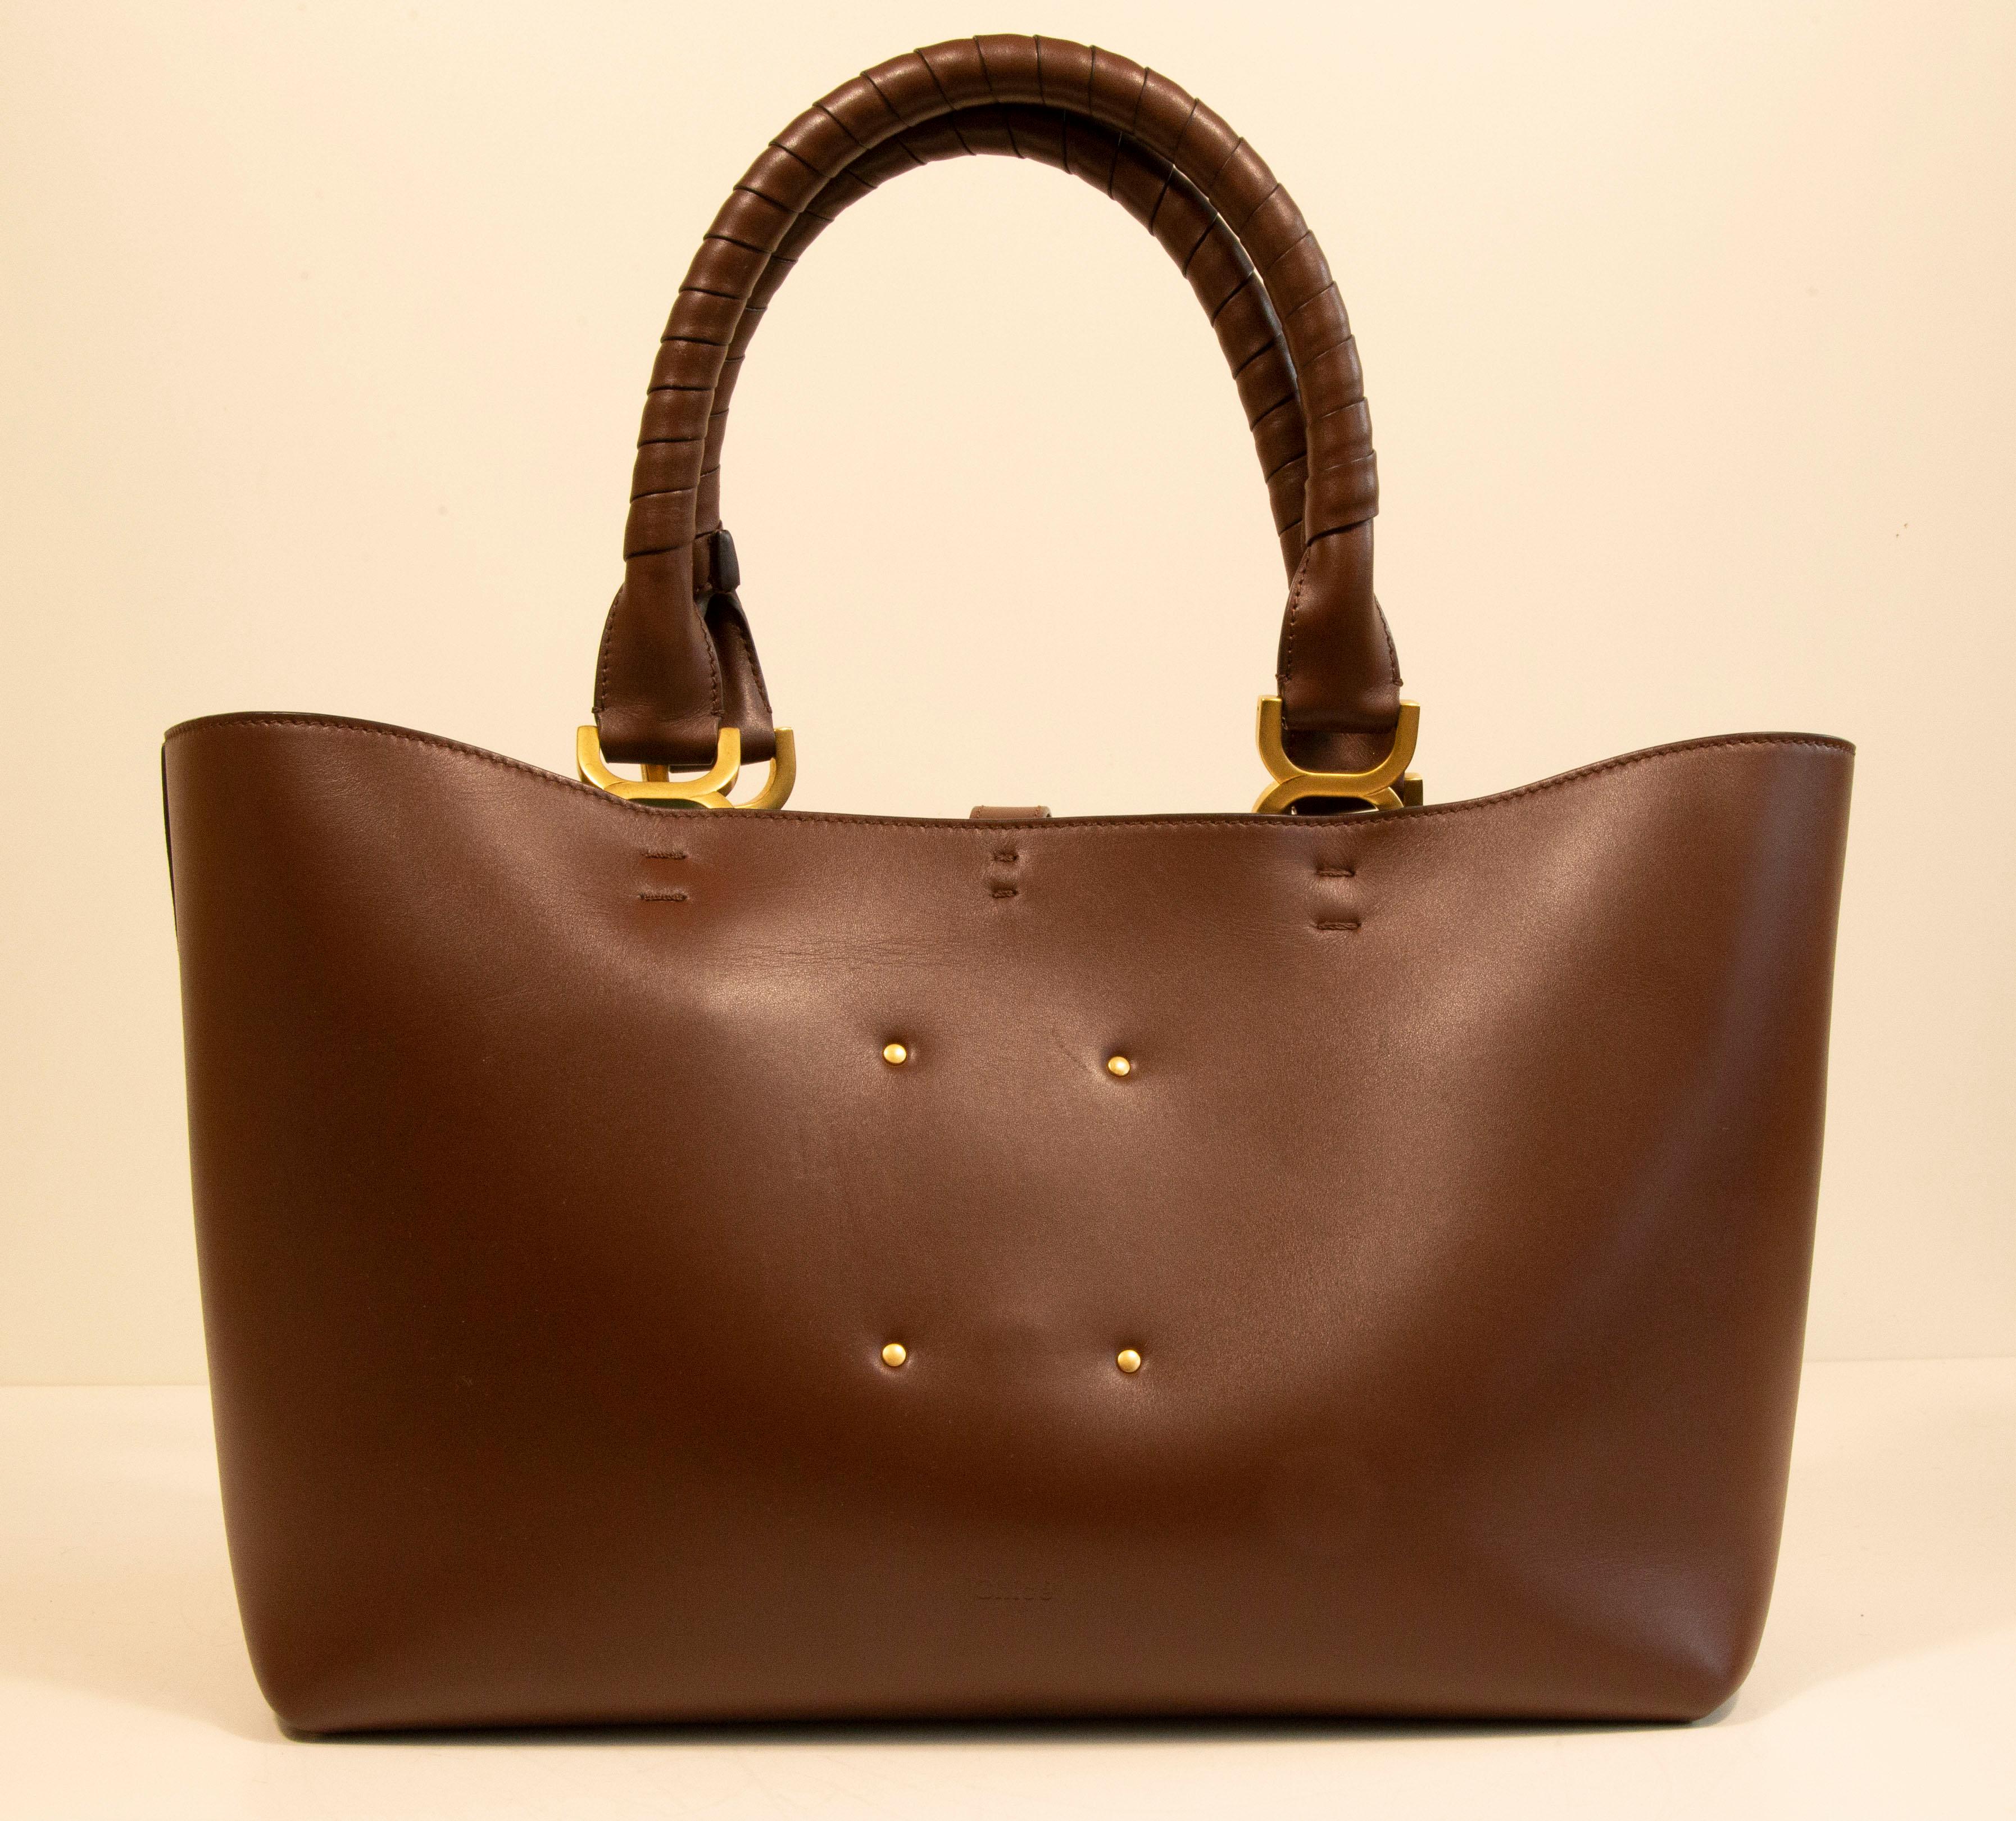 2020s Chloe Marcie Small Tote Bag in Brown Leather In Excellent Condition For Sale In Arnhem, NL